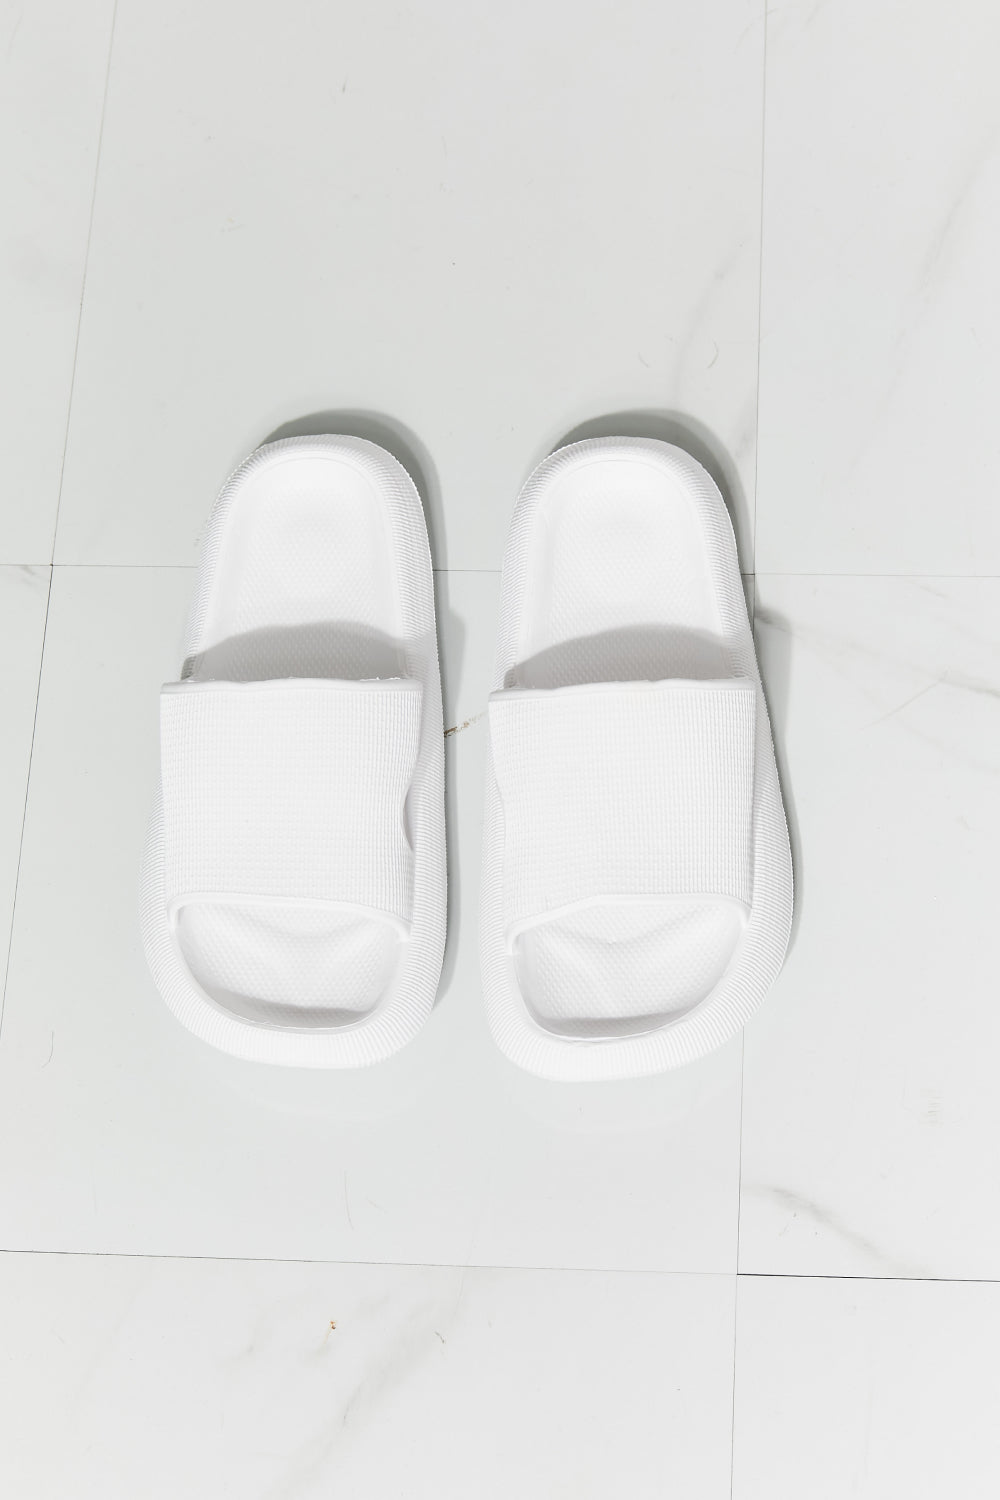 MMShoes Arms Around Me Open Toe White Slide - EMMY